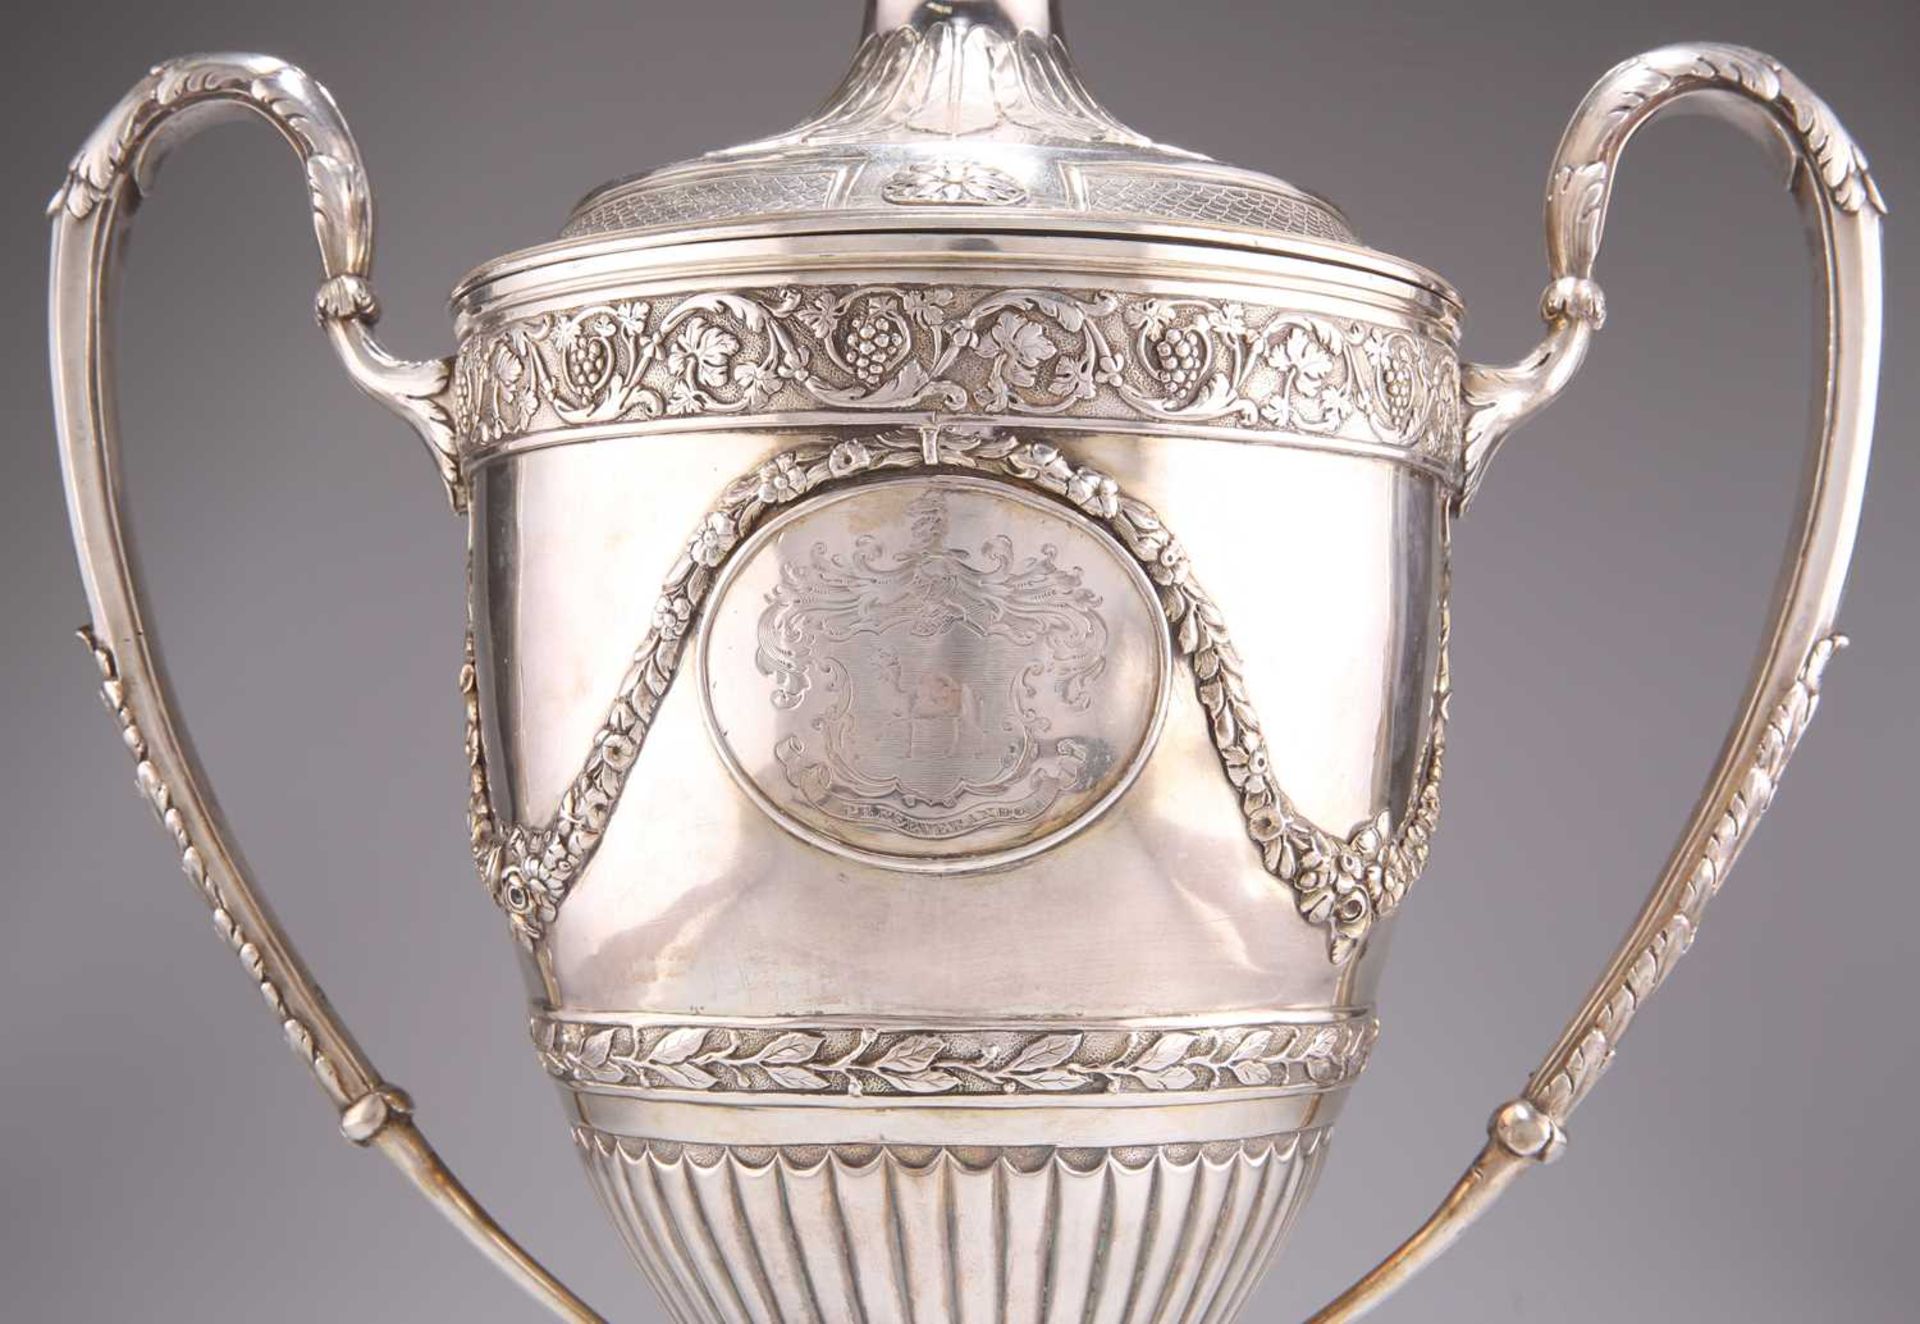 A GEORGE III SILVER-GILT TWO-HANDLED CUP AND COVER - Image 3 of 5